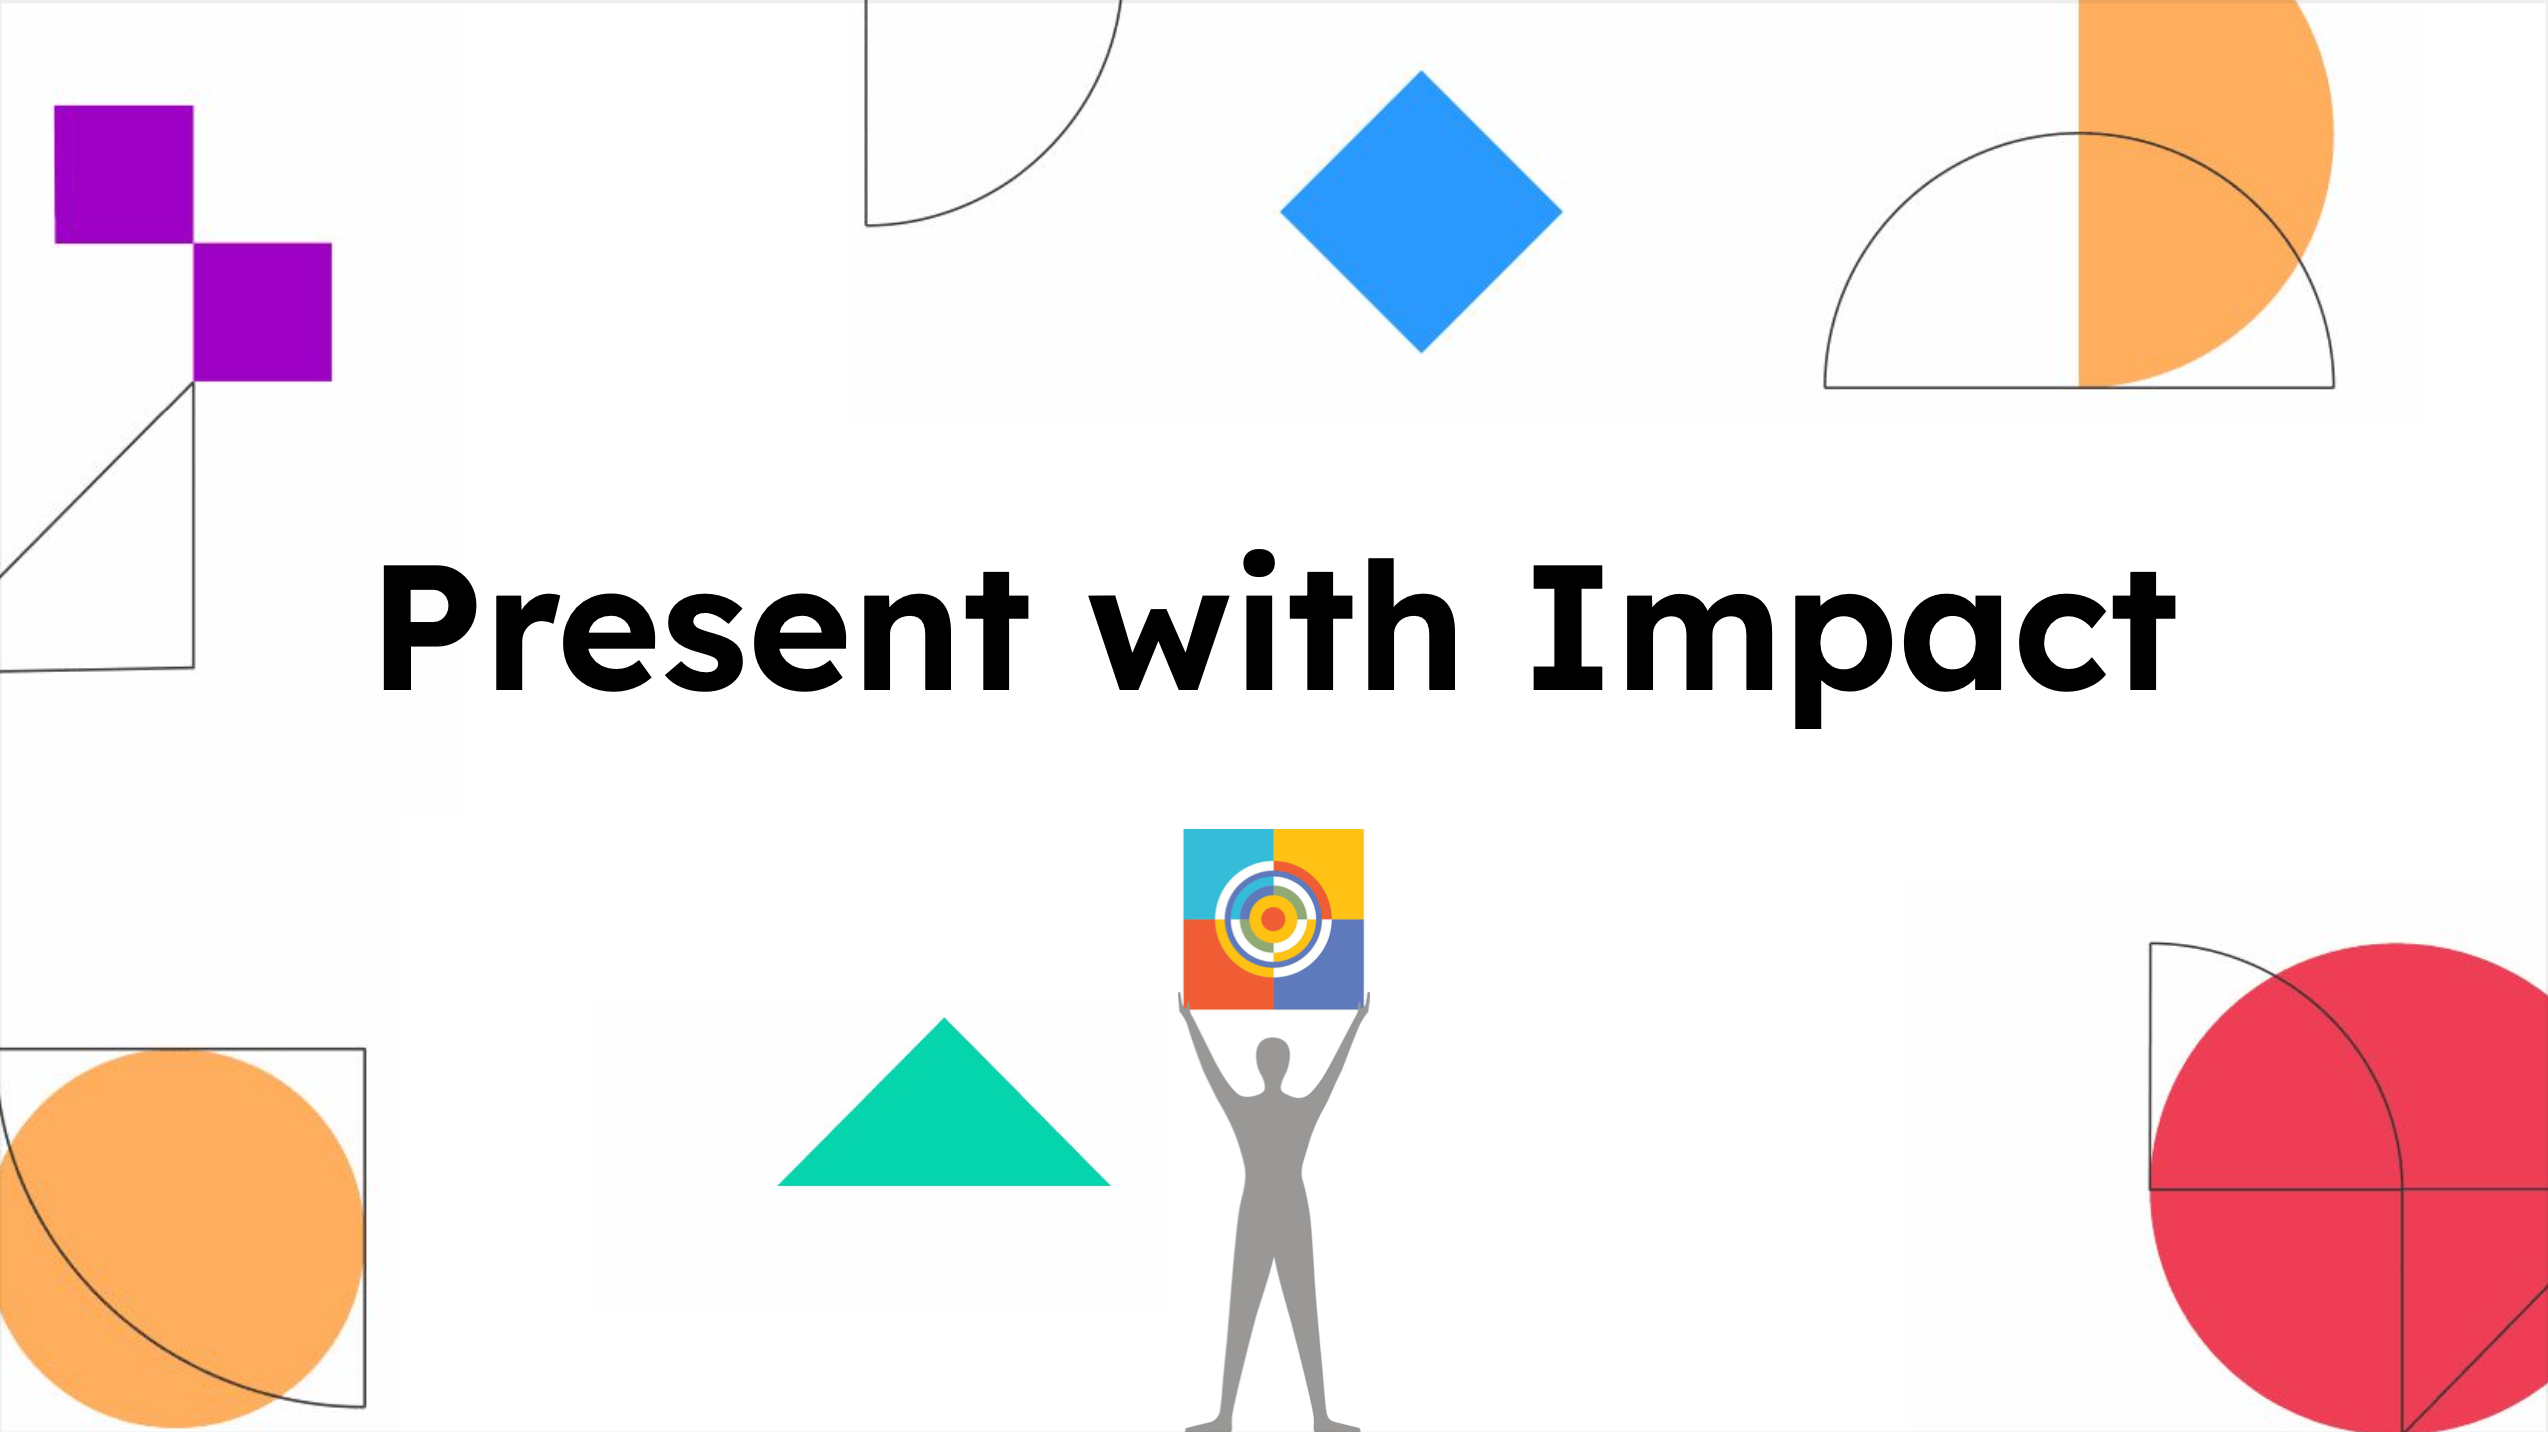 Presenting with Impact